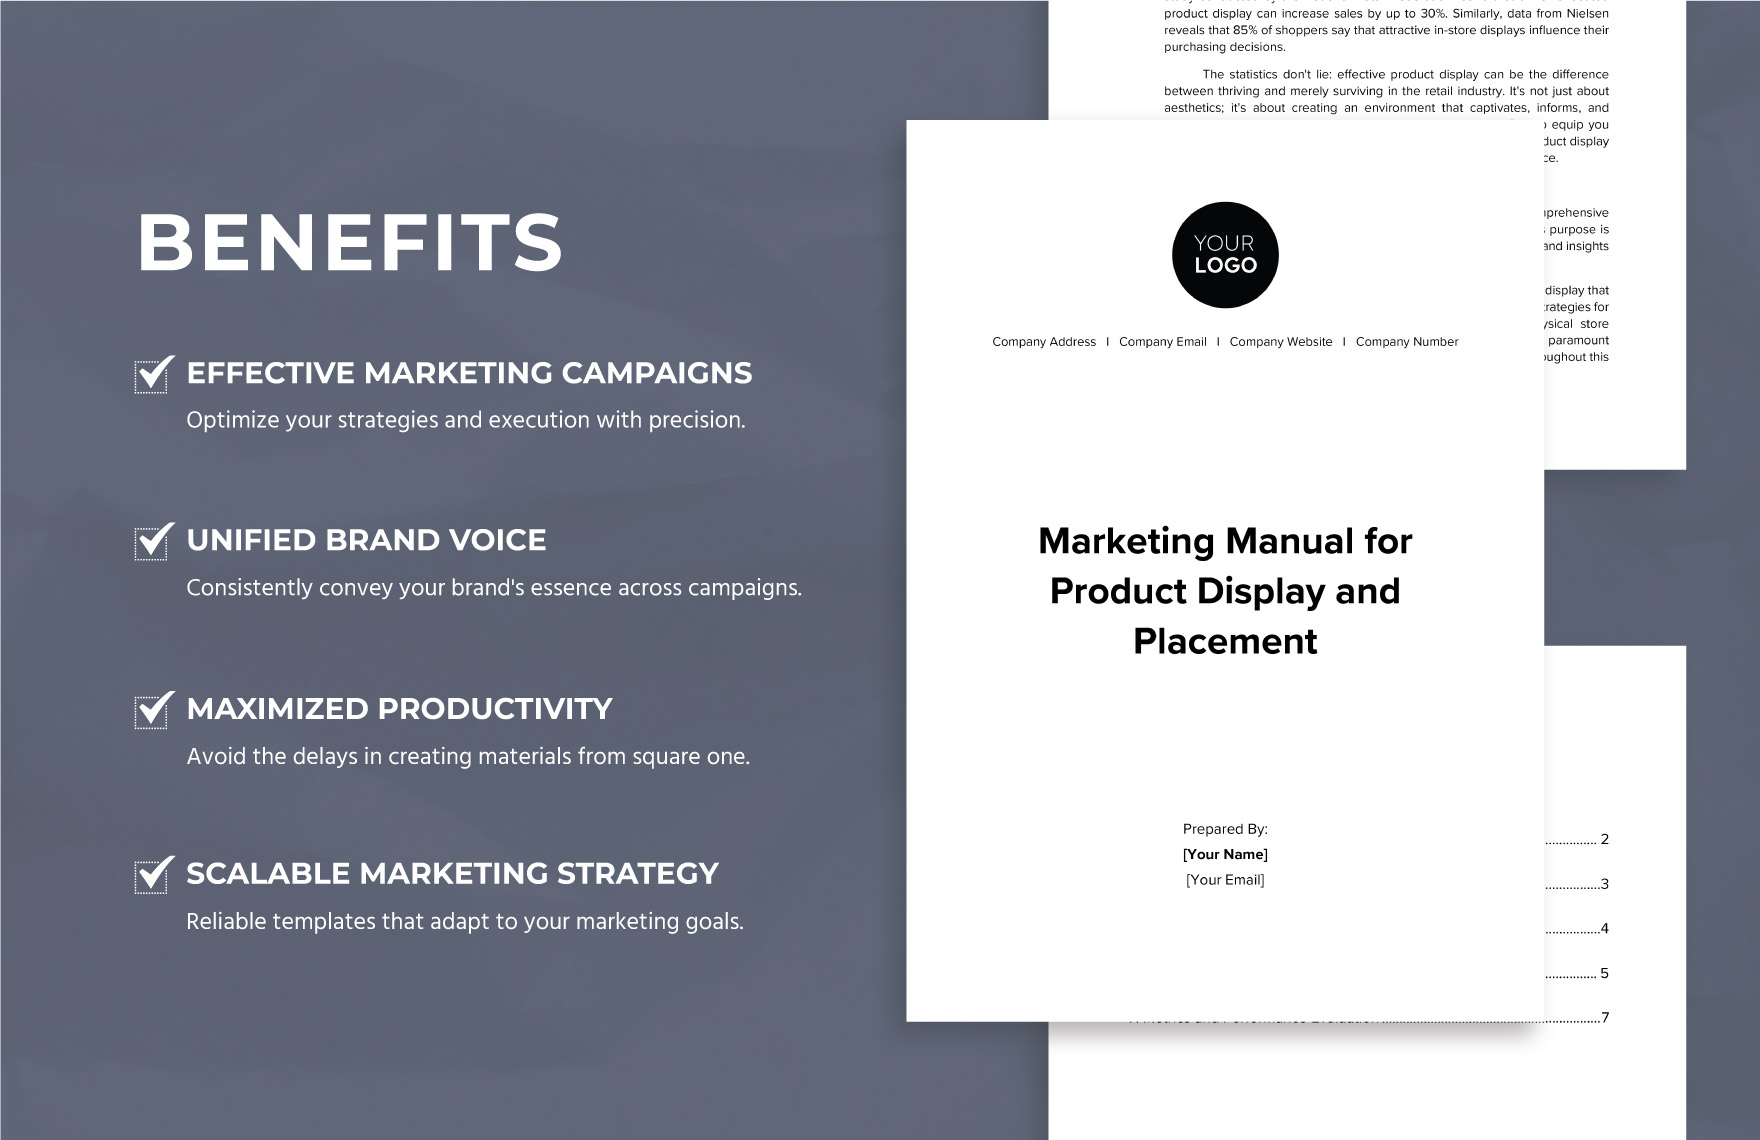 Marketing Manual for Product Display and Placement Template in Word